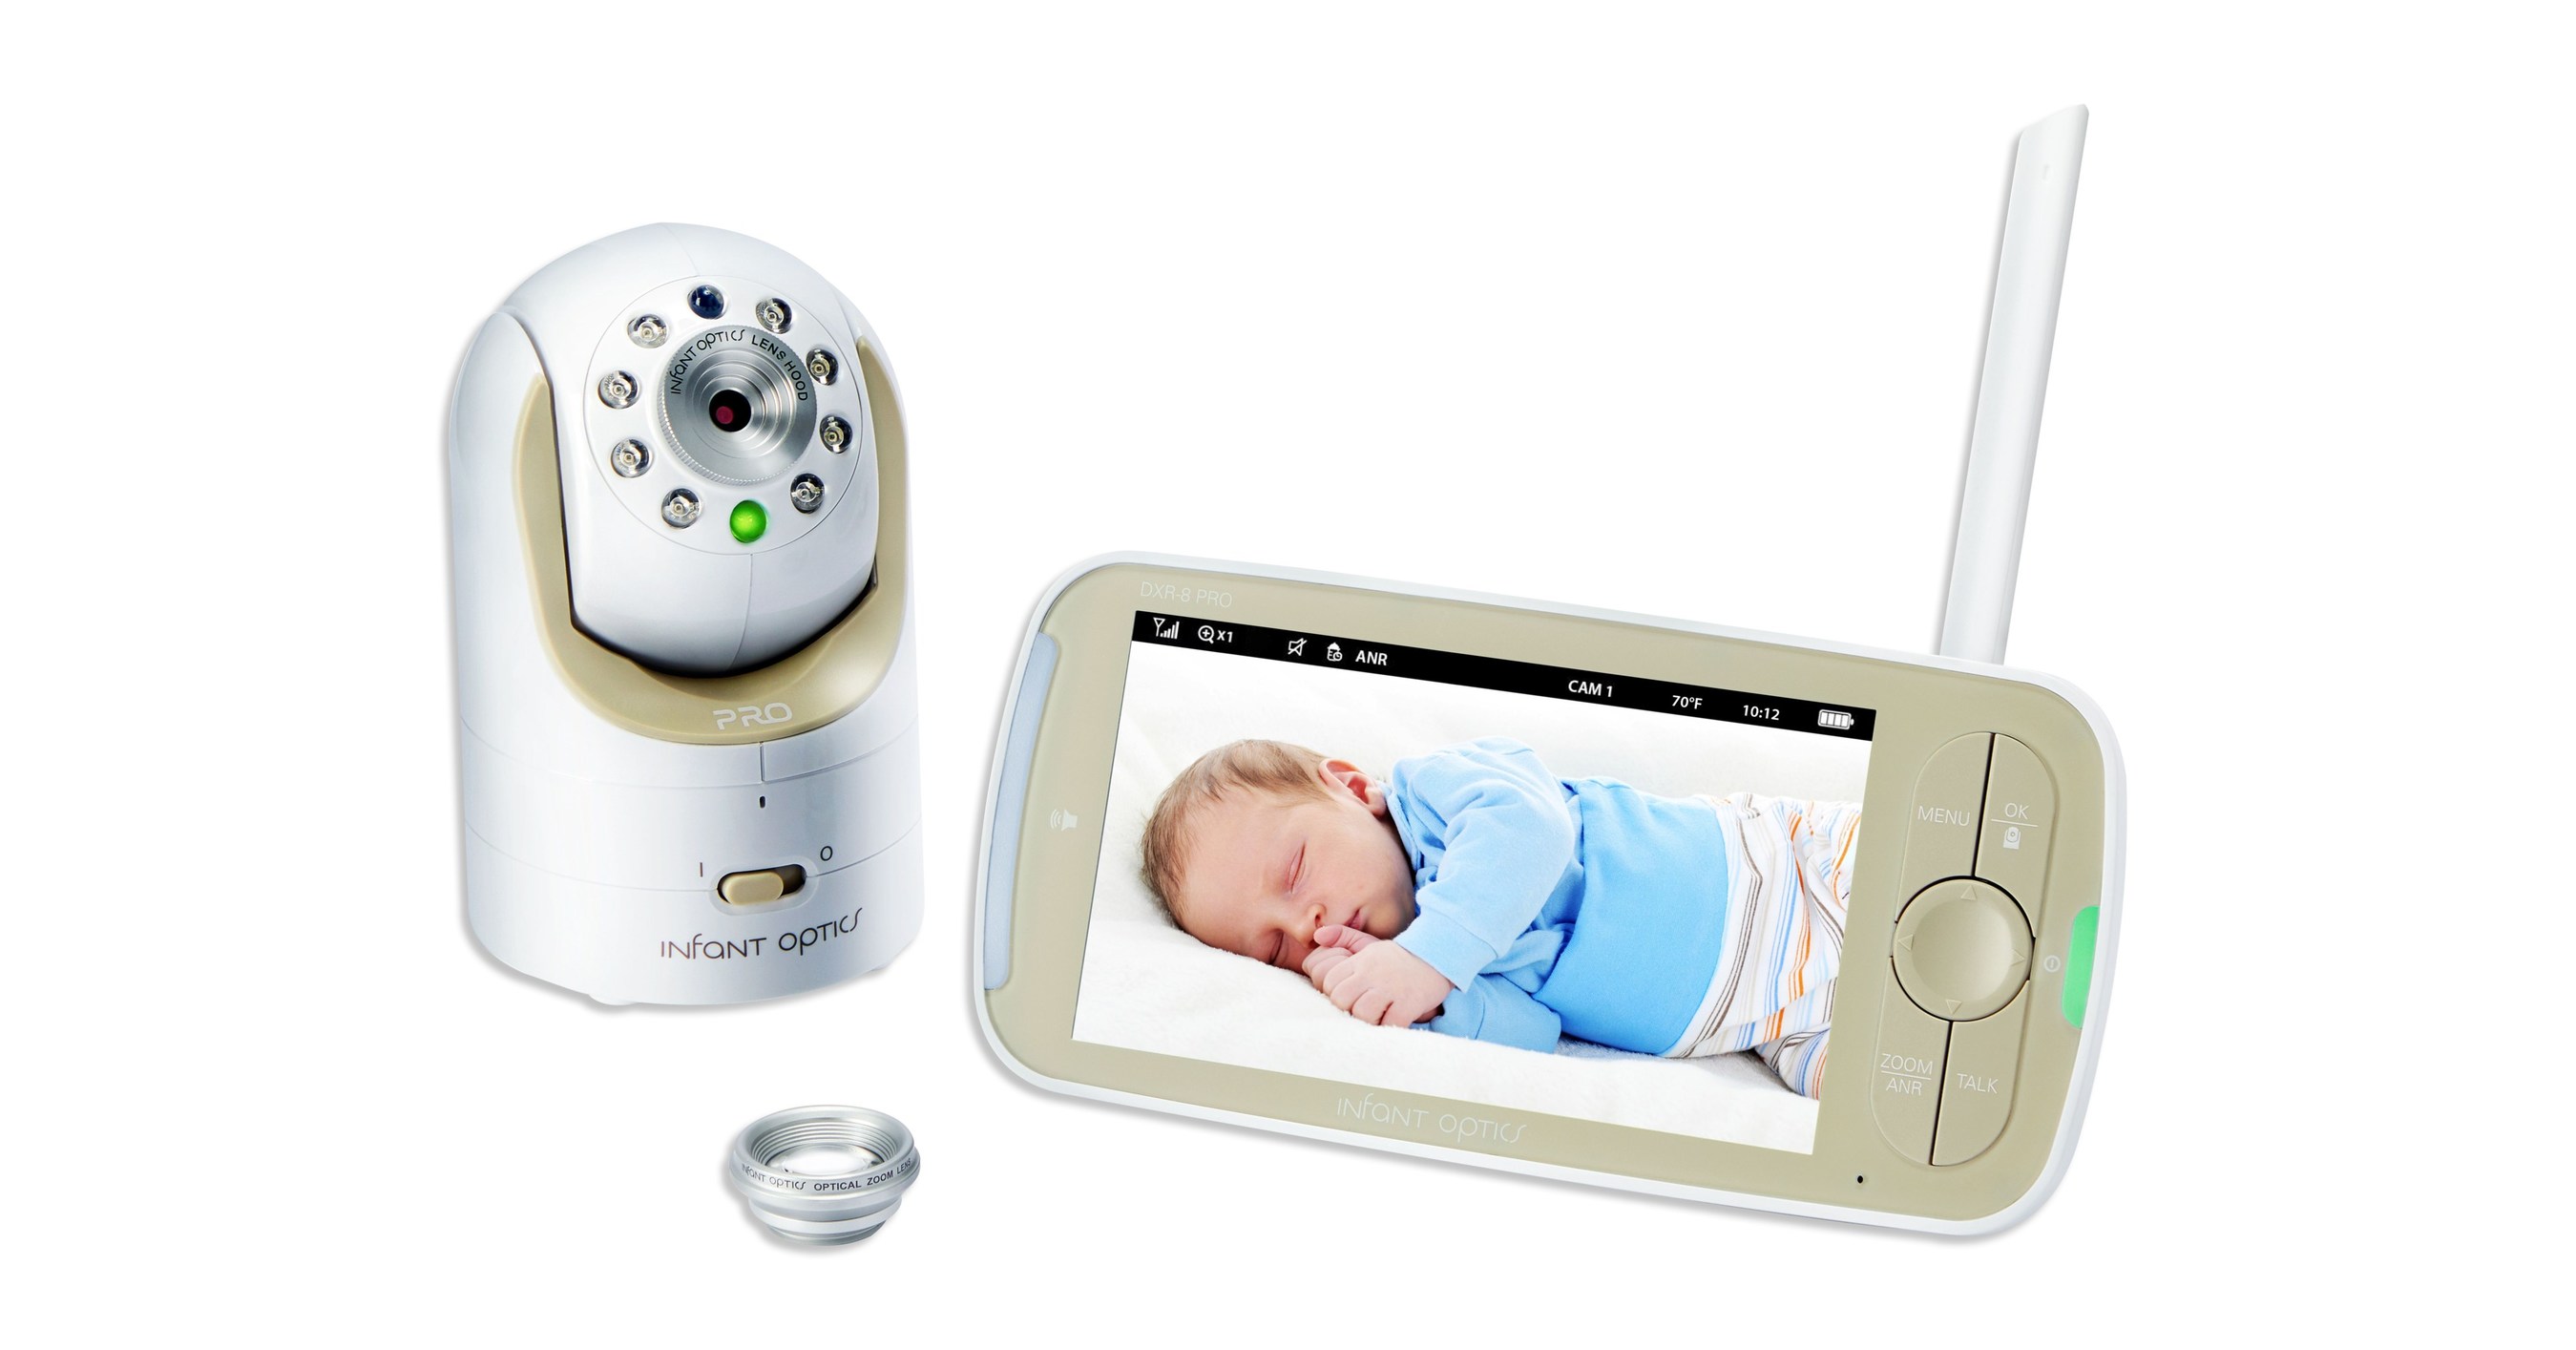 Infant Optics Launches Innovative DXR-8 PRO Video Baby Monitor